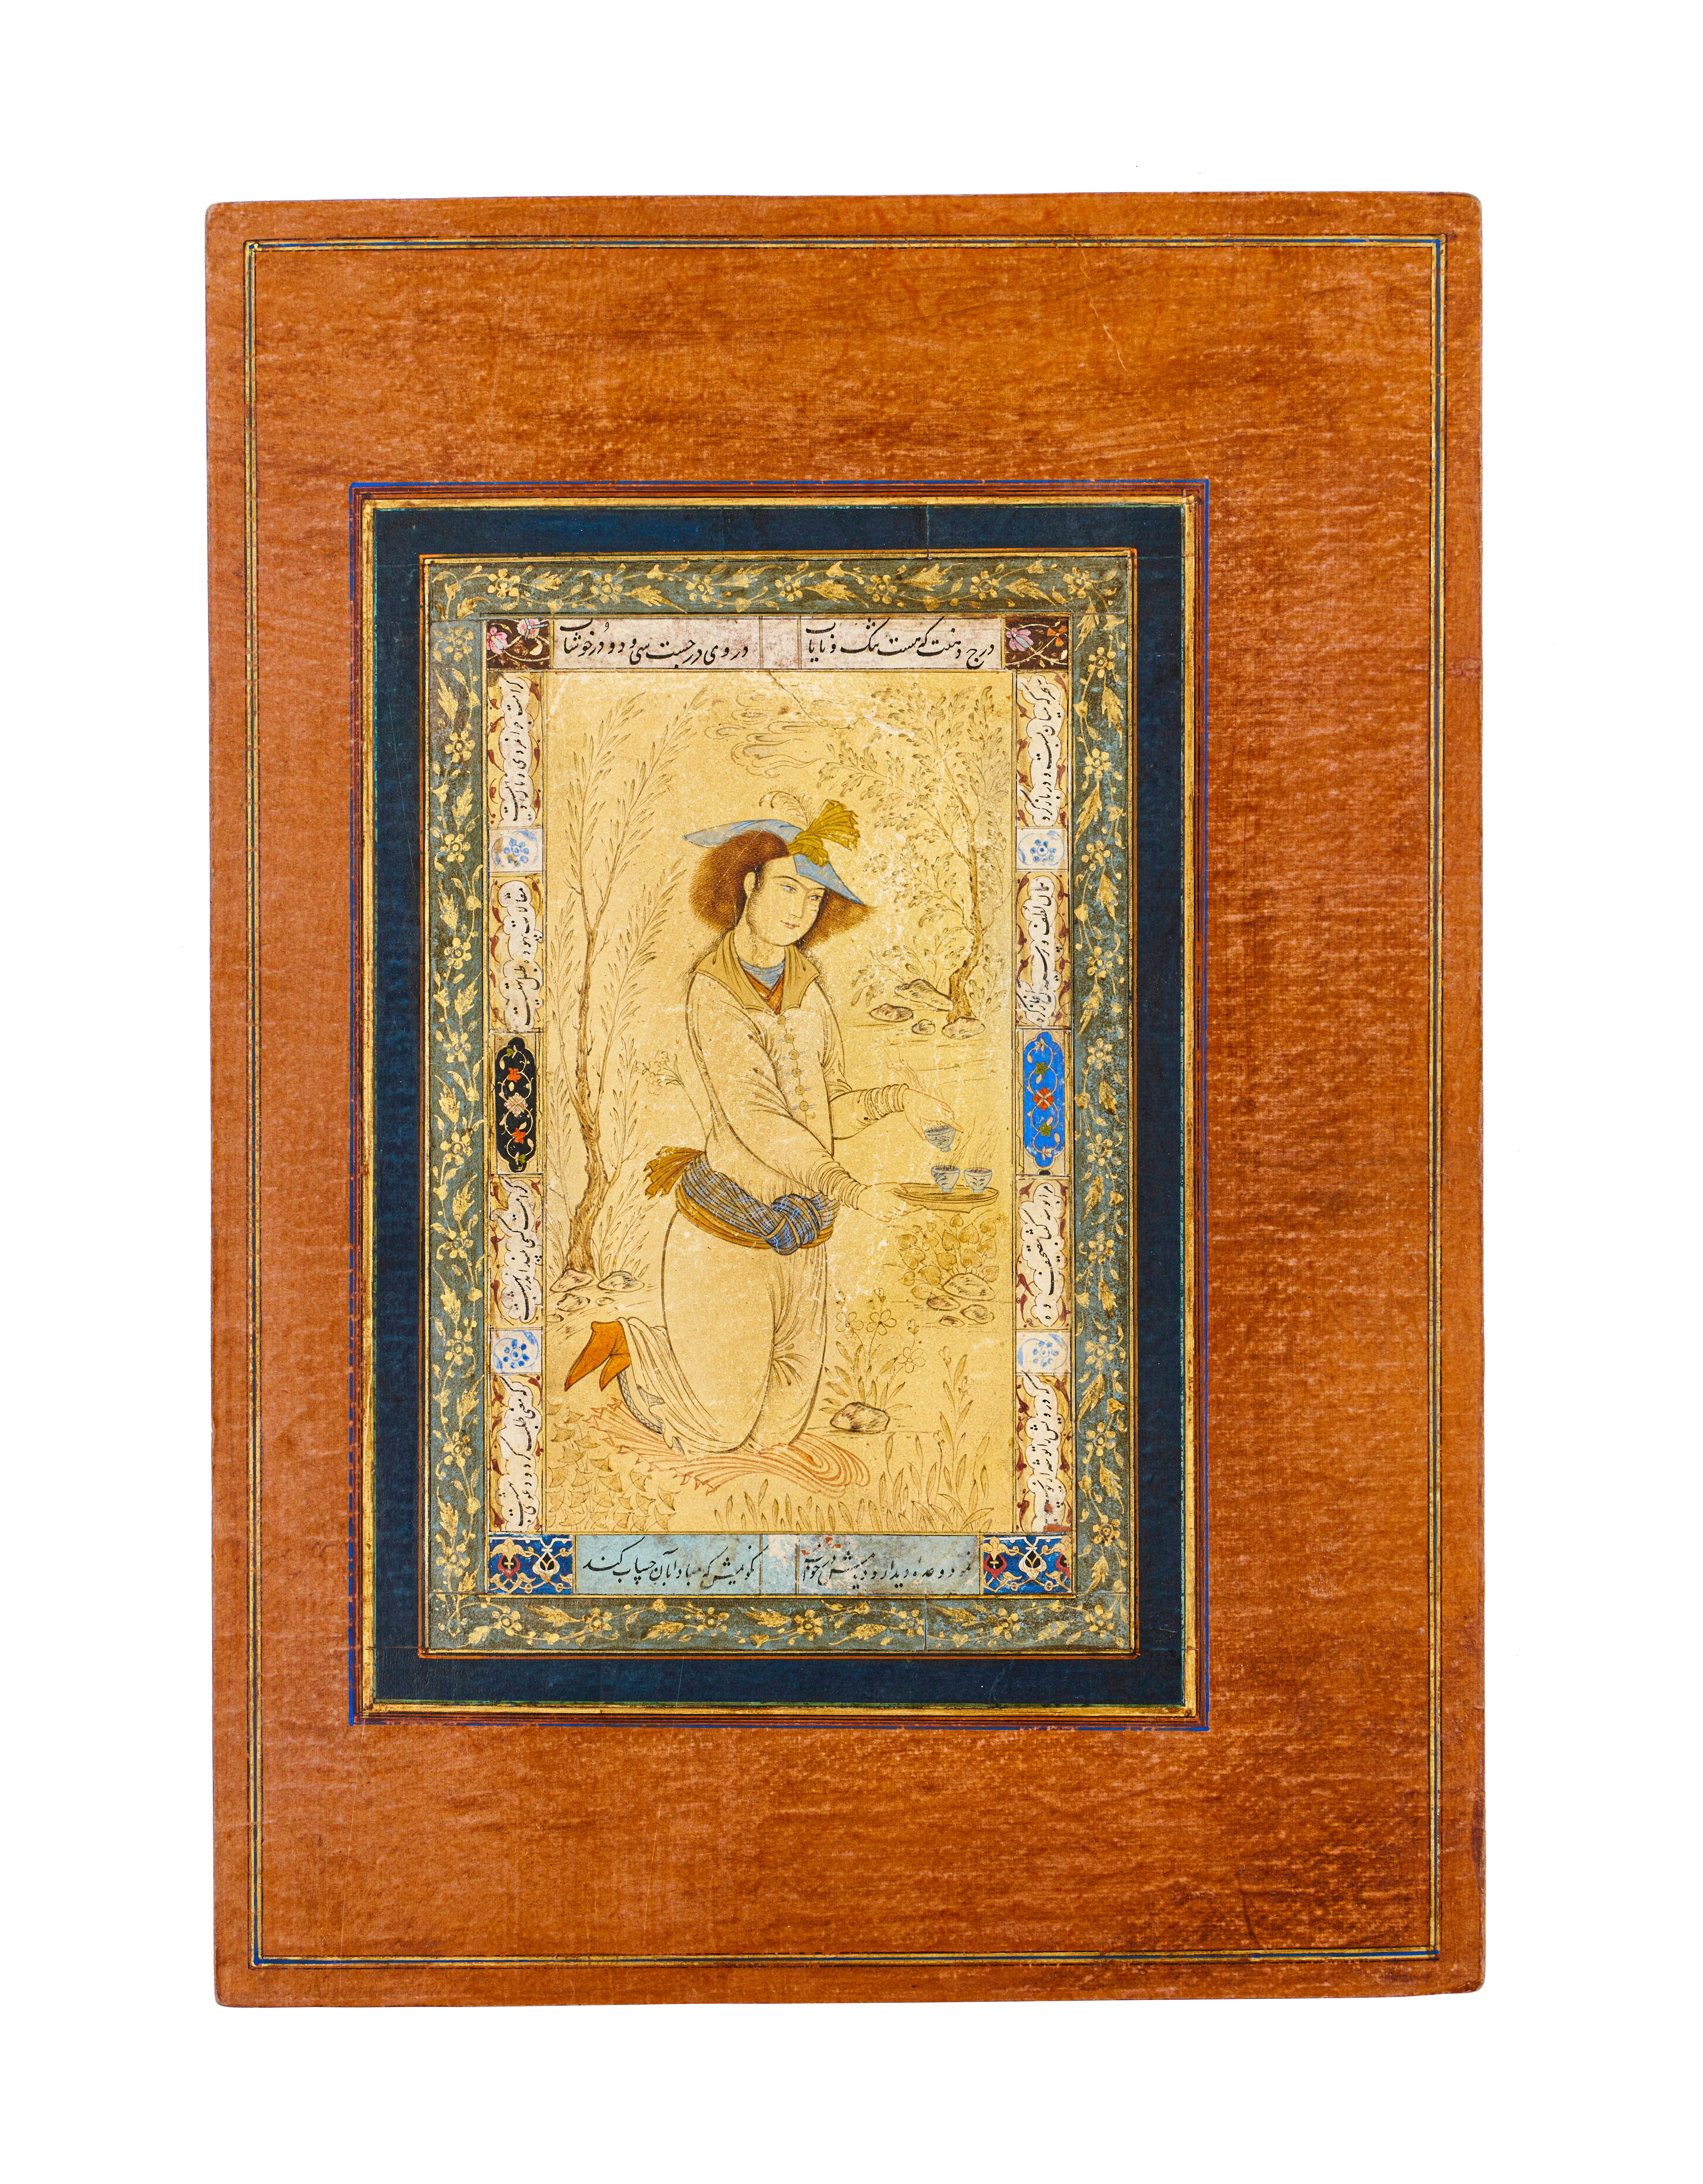 IN THE MANNER OF SAFAVID, A YOUTH HOLDING COFFEE CUPS, 18TH/19TH CENTURY, PERSIA